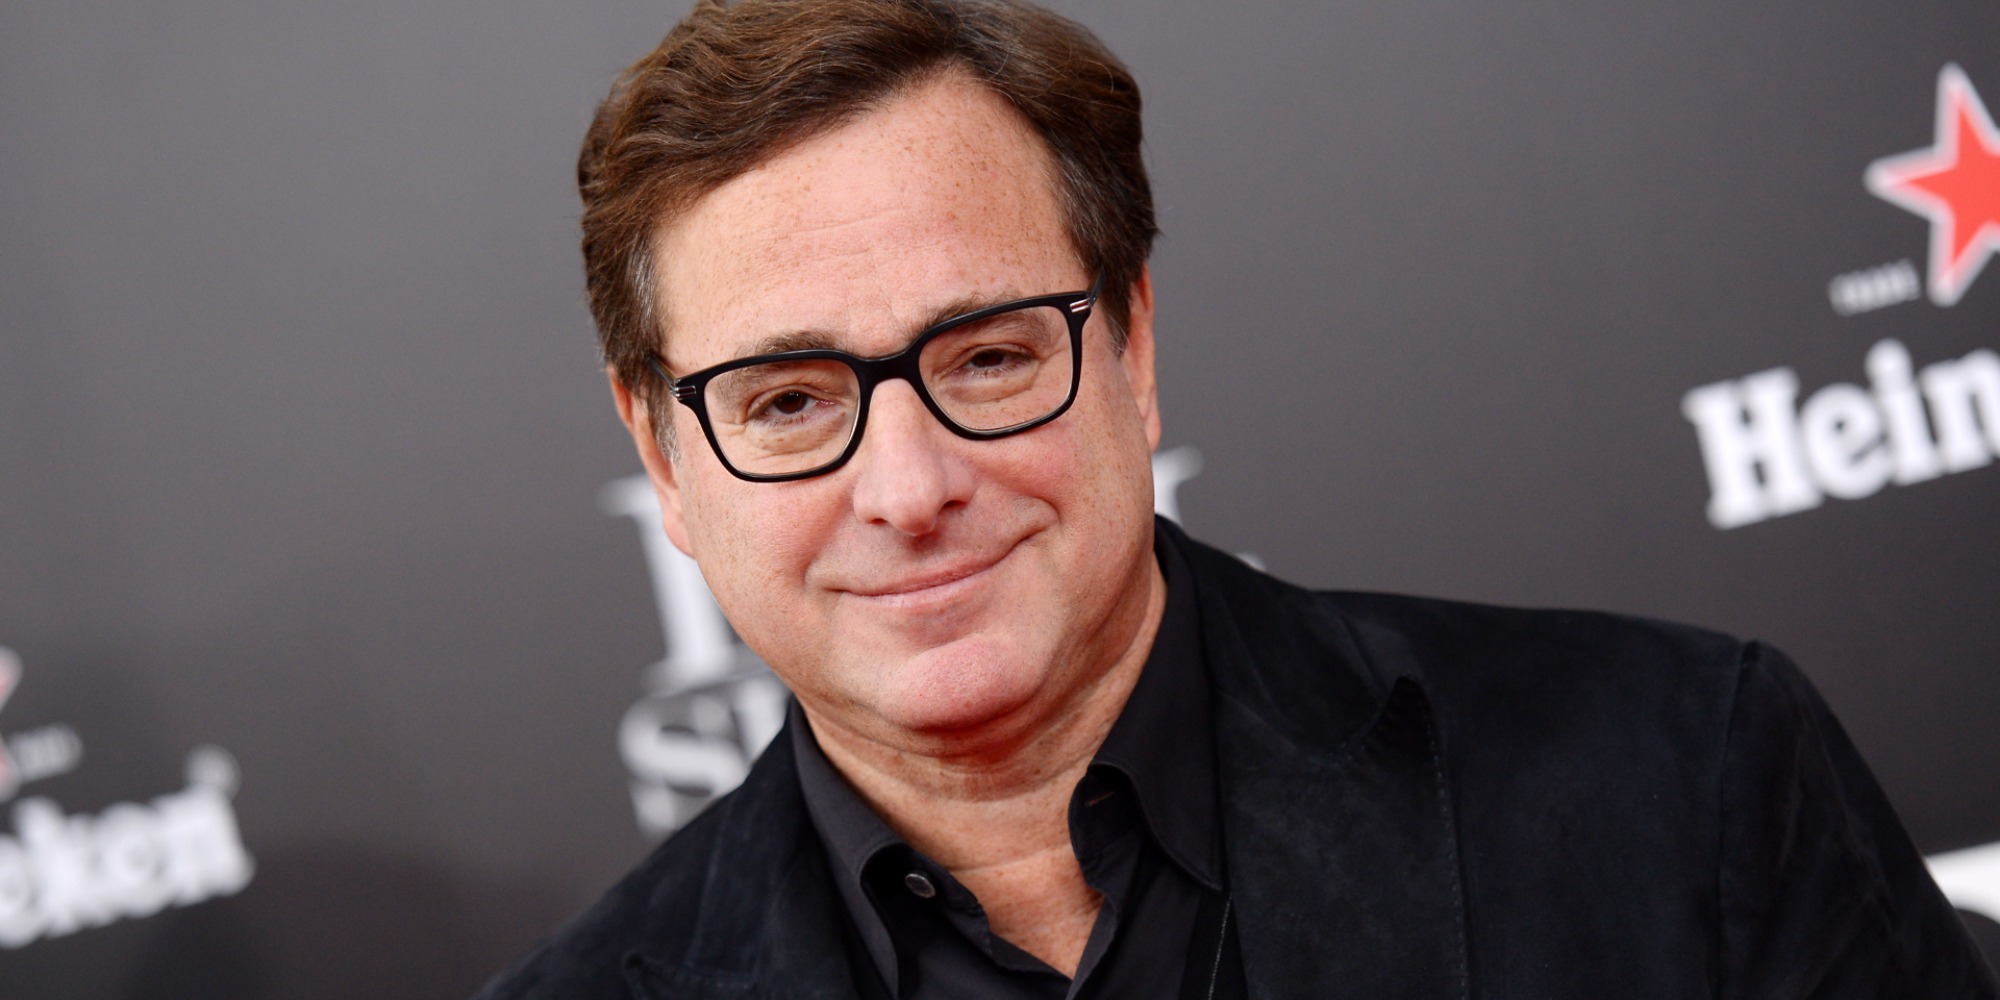 Bob Saget wearing a black suit poses for photographers in front of a black backdrop.